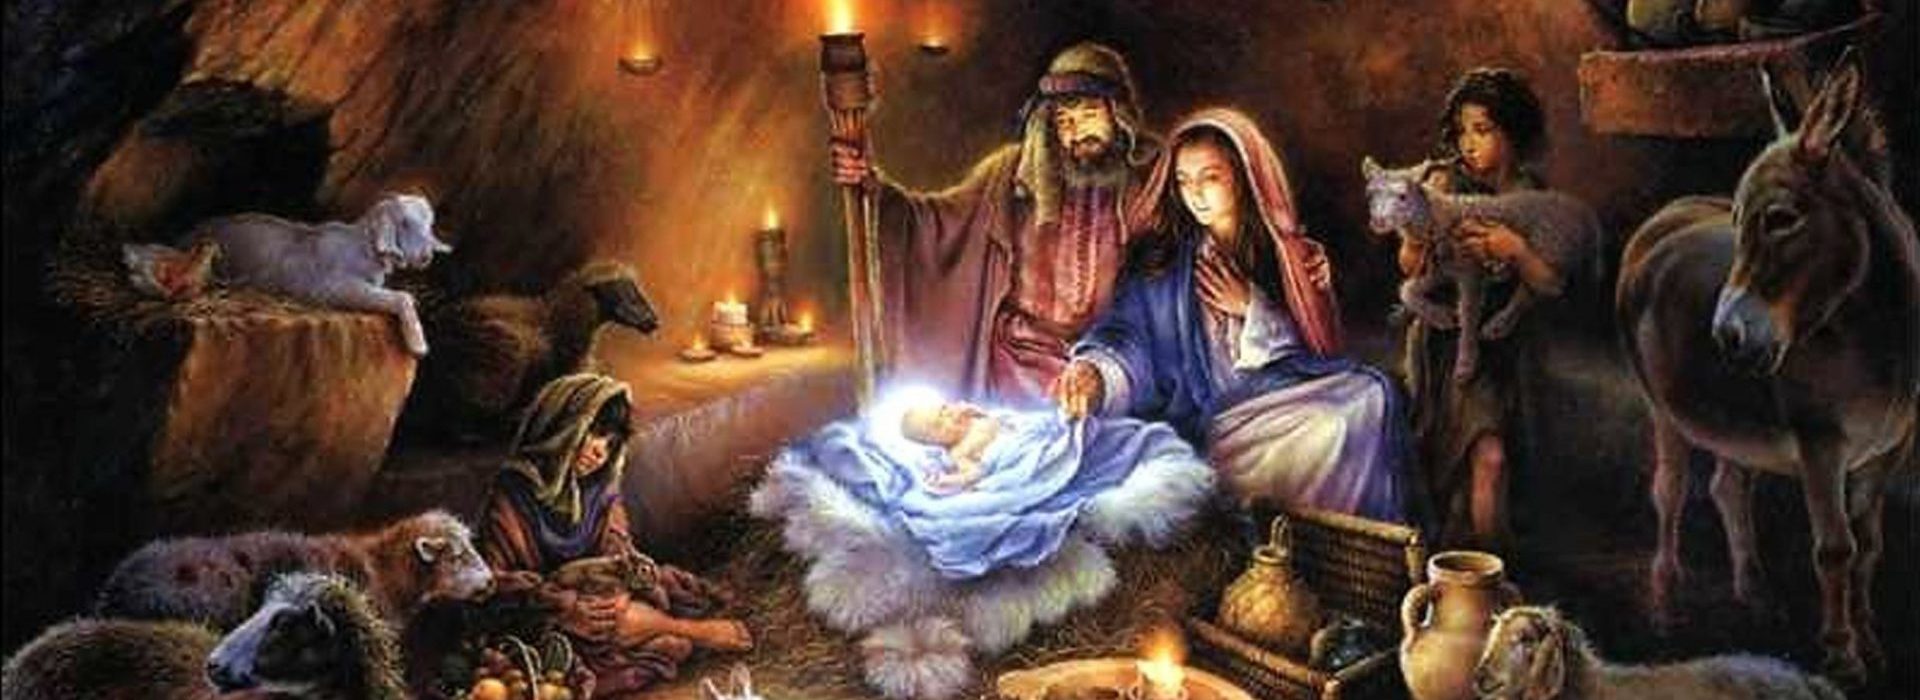 BABY BORN BARN MOTHER JESUS MARY Pictures